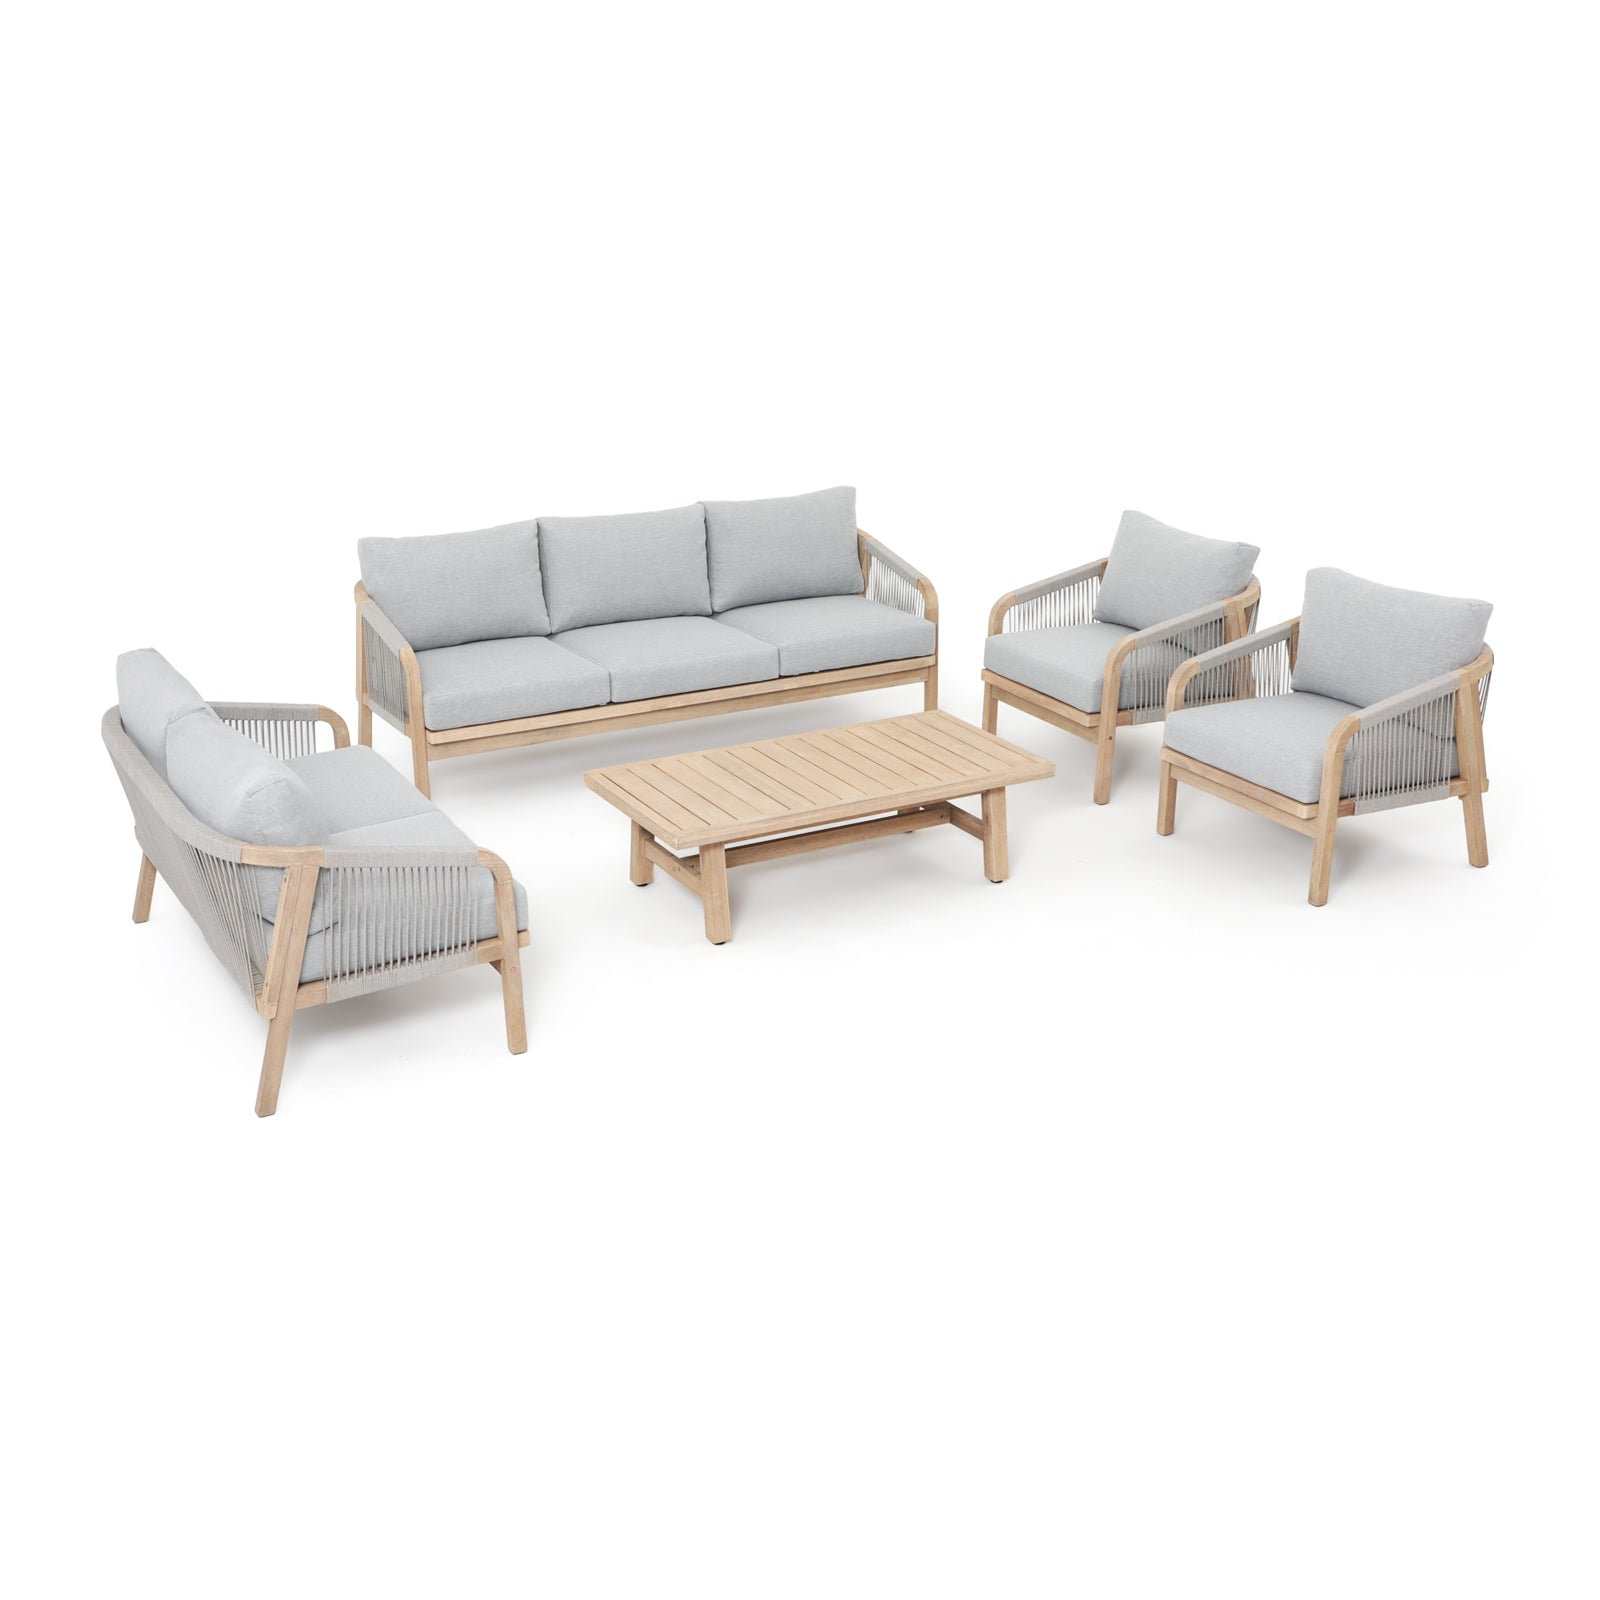 Thalea 5 Piece Wooden Patio Conversation Set with Coffee Table, 7 Seats